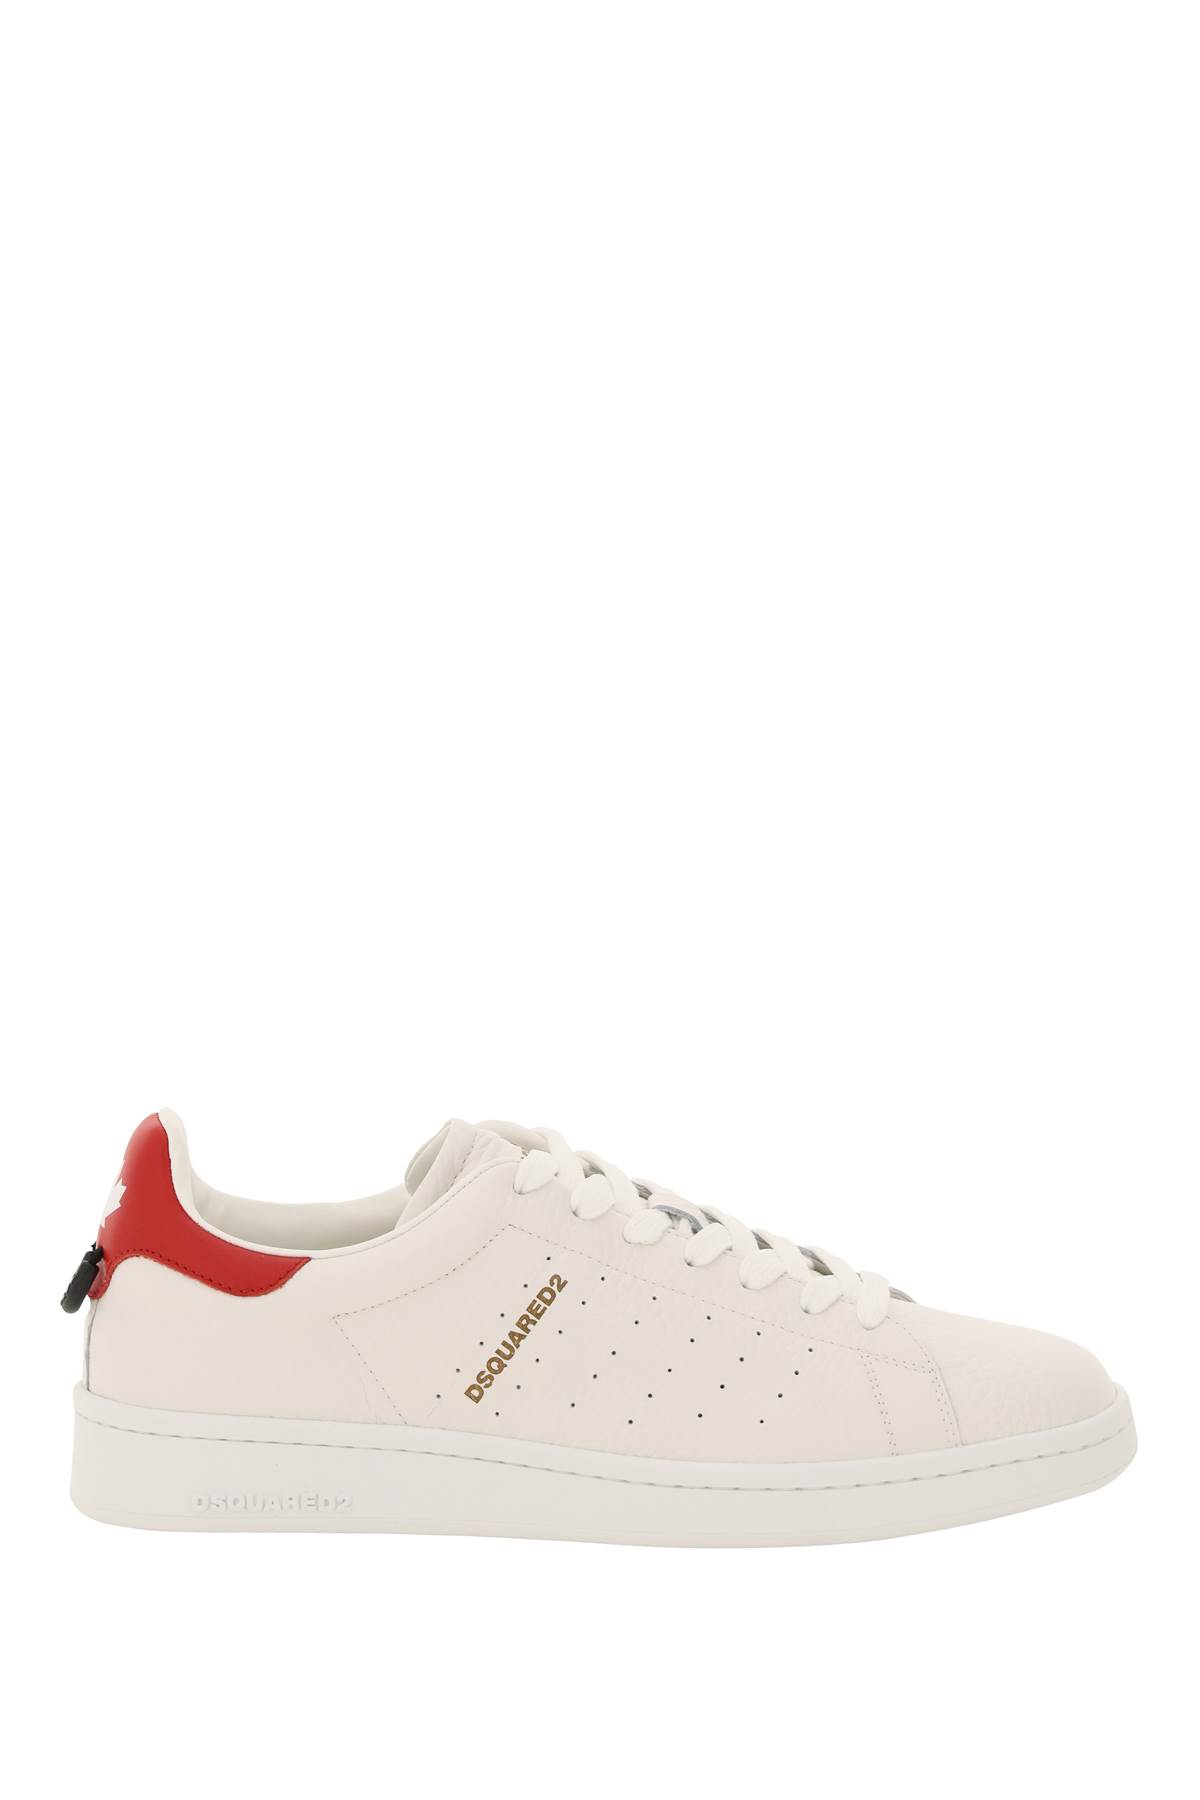 Dsquared2 Leather Boxer Sneakers